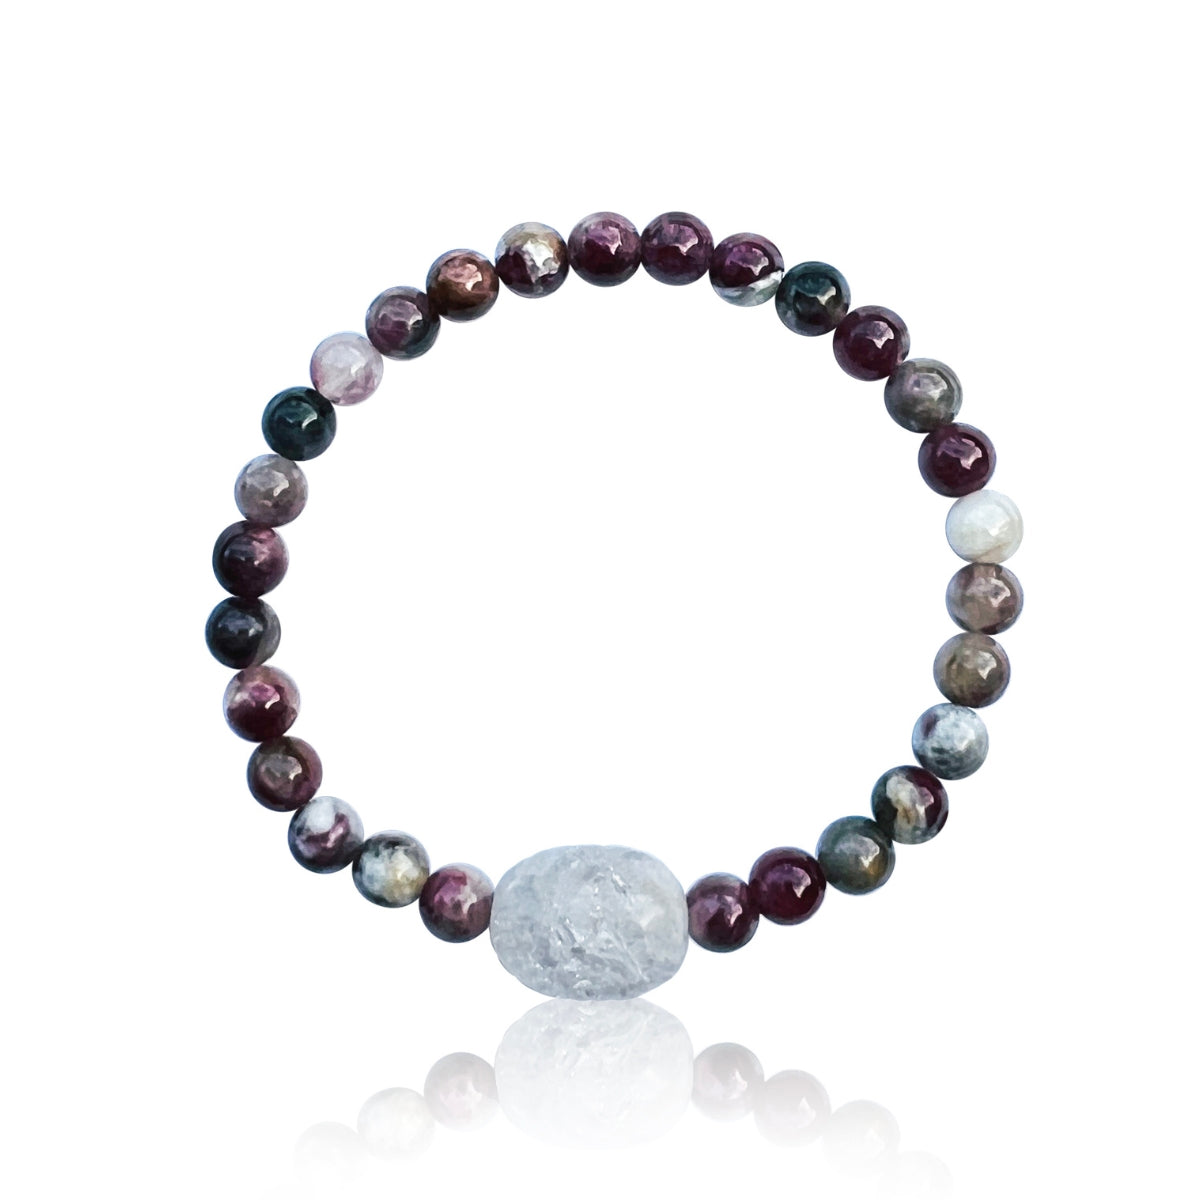 Being happy is for most of us one of the key aims in life. But there is no way to happiness, happiness is the way. Wear this Eternal Optimist Eudialyte Bracelet and project unconditional love towards the world and self.